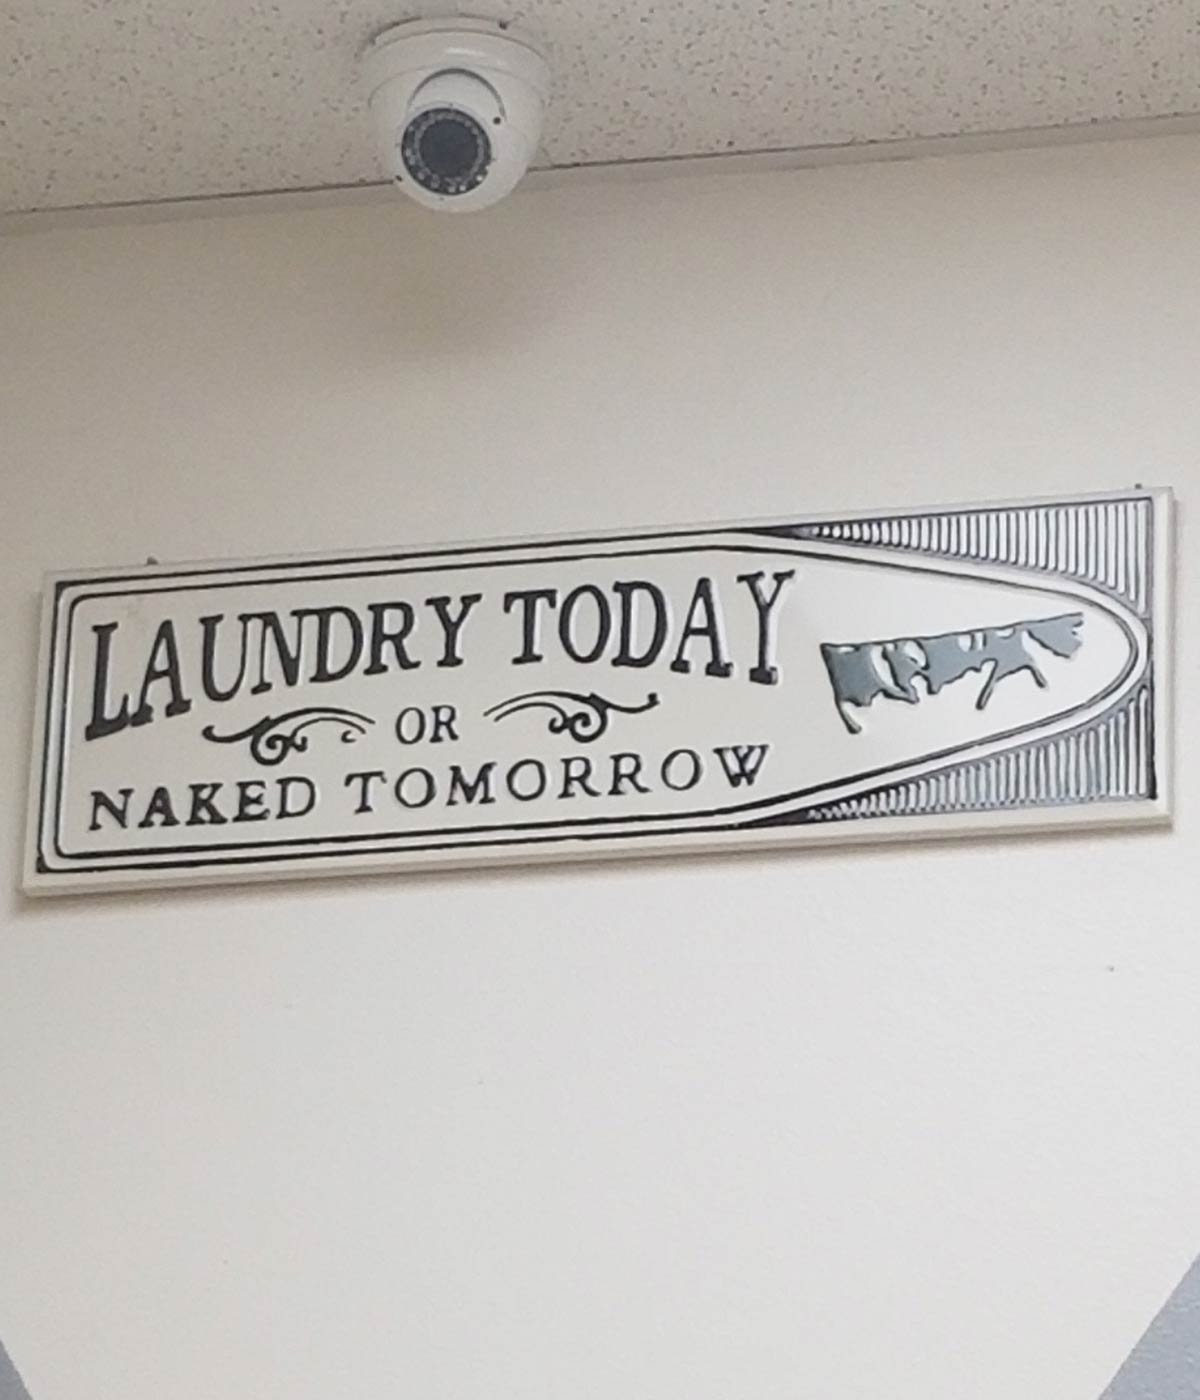 Sign I found at the laundromat